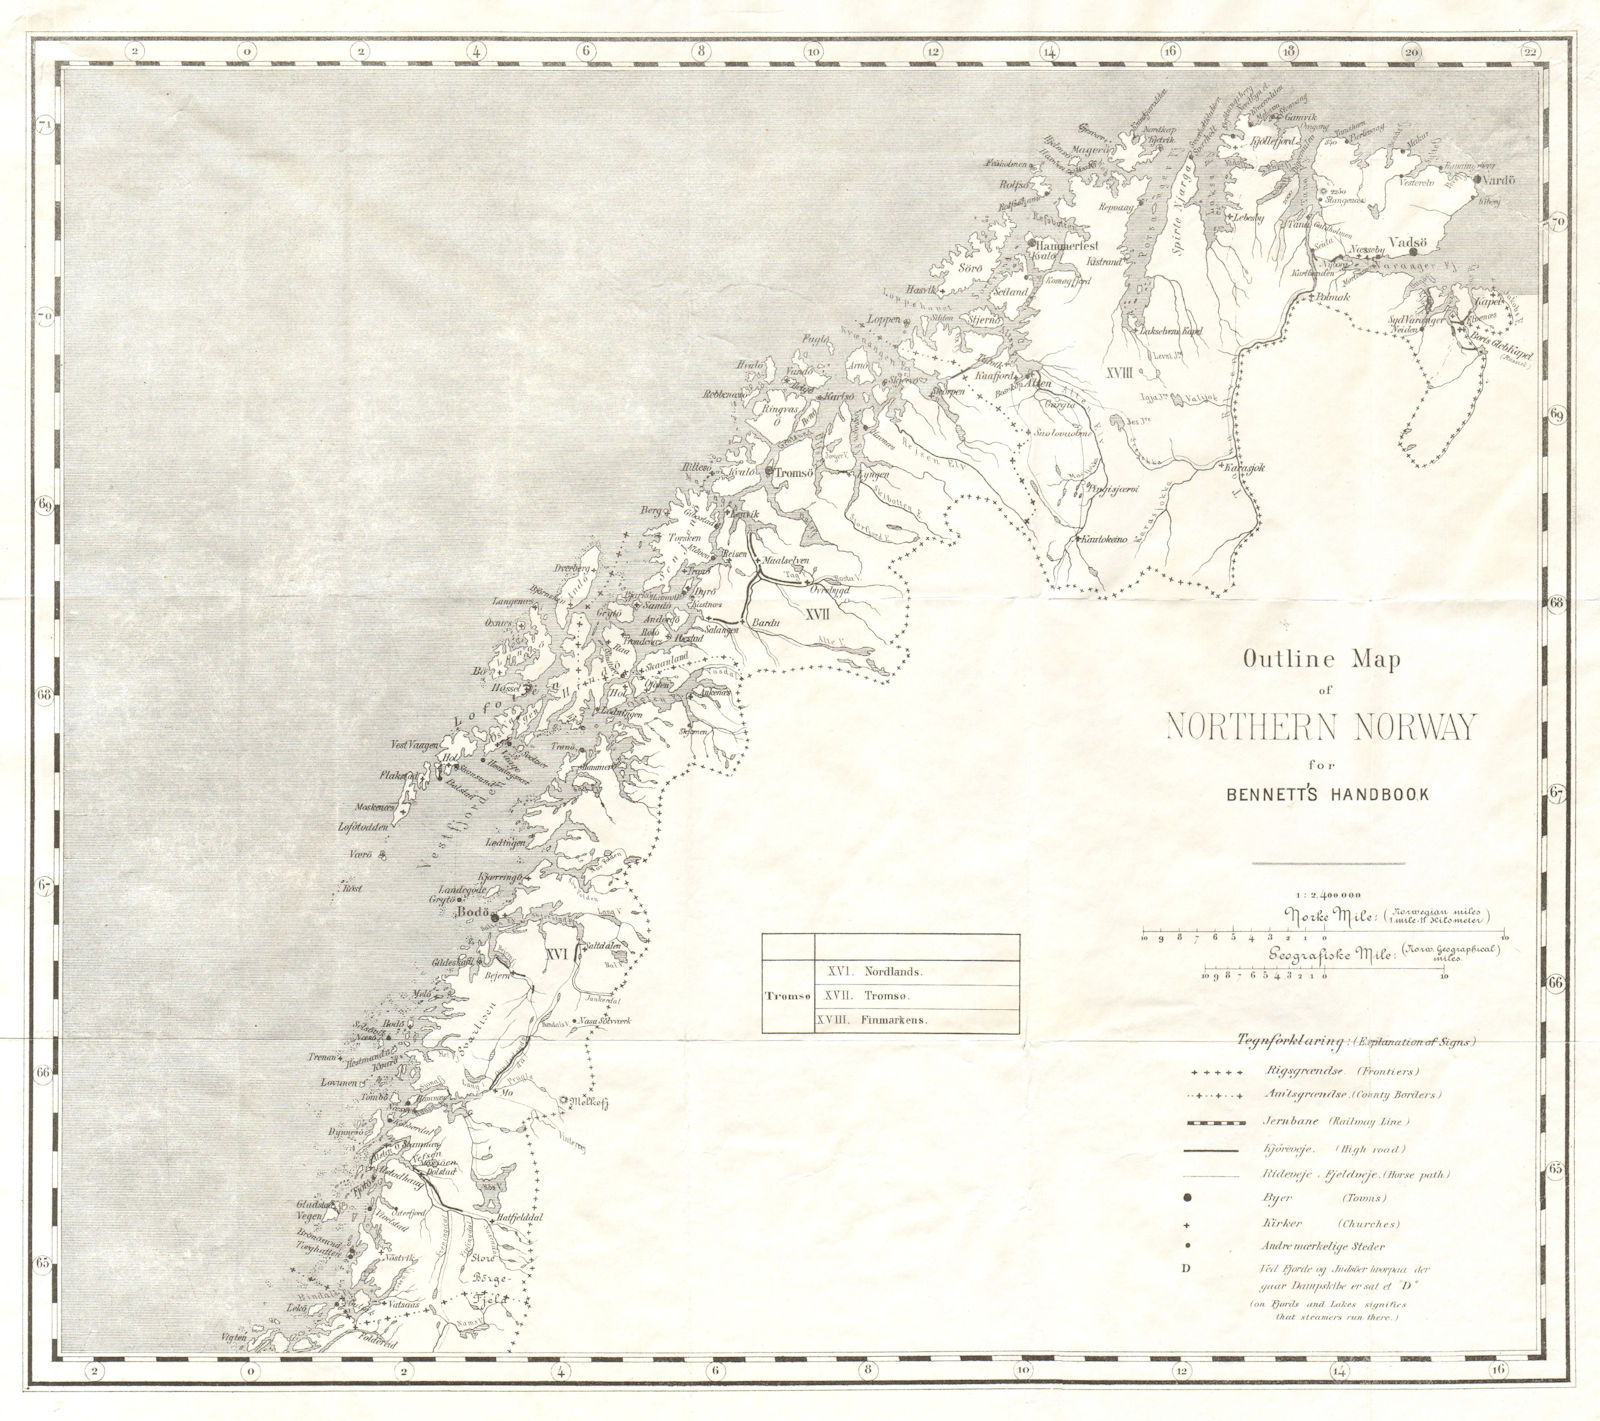 NORTHERN NORWAY showing railways & Rideveje Fjeldveje (horse paths) 1896 map